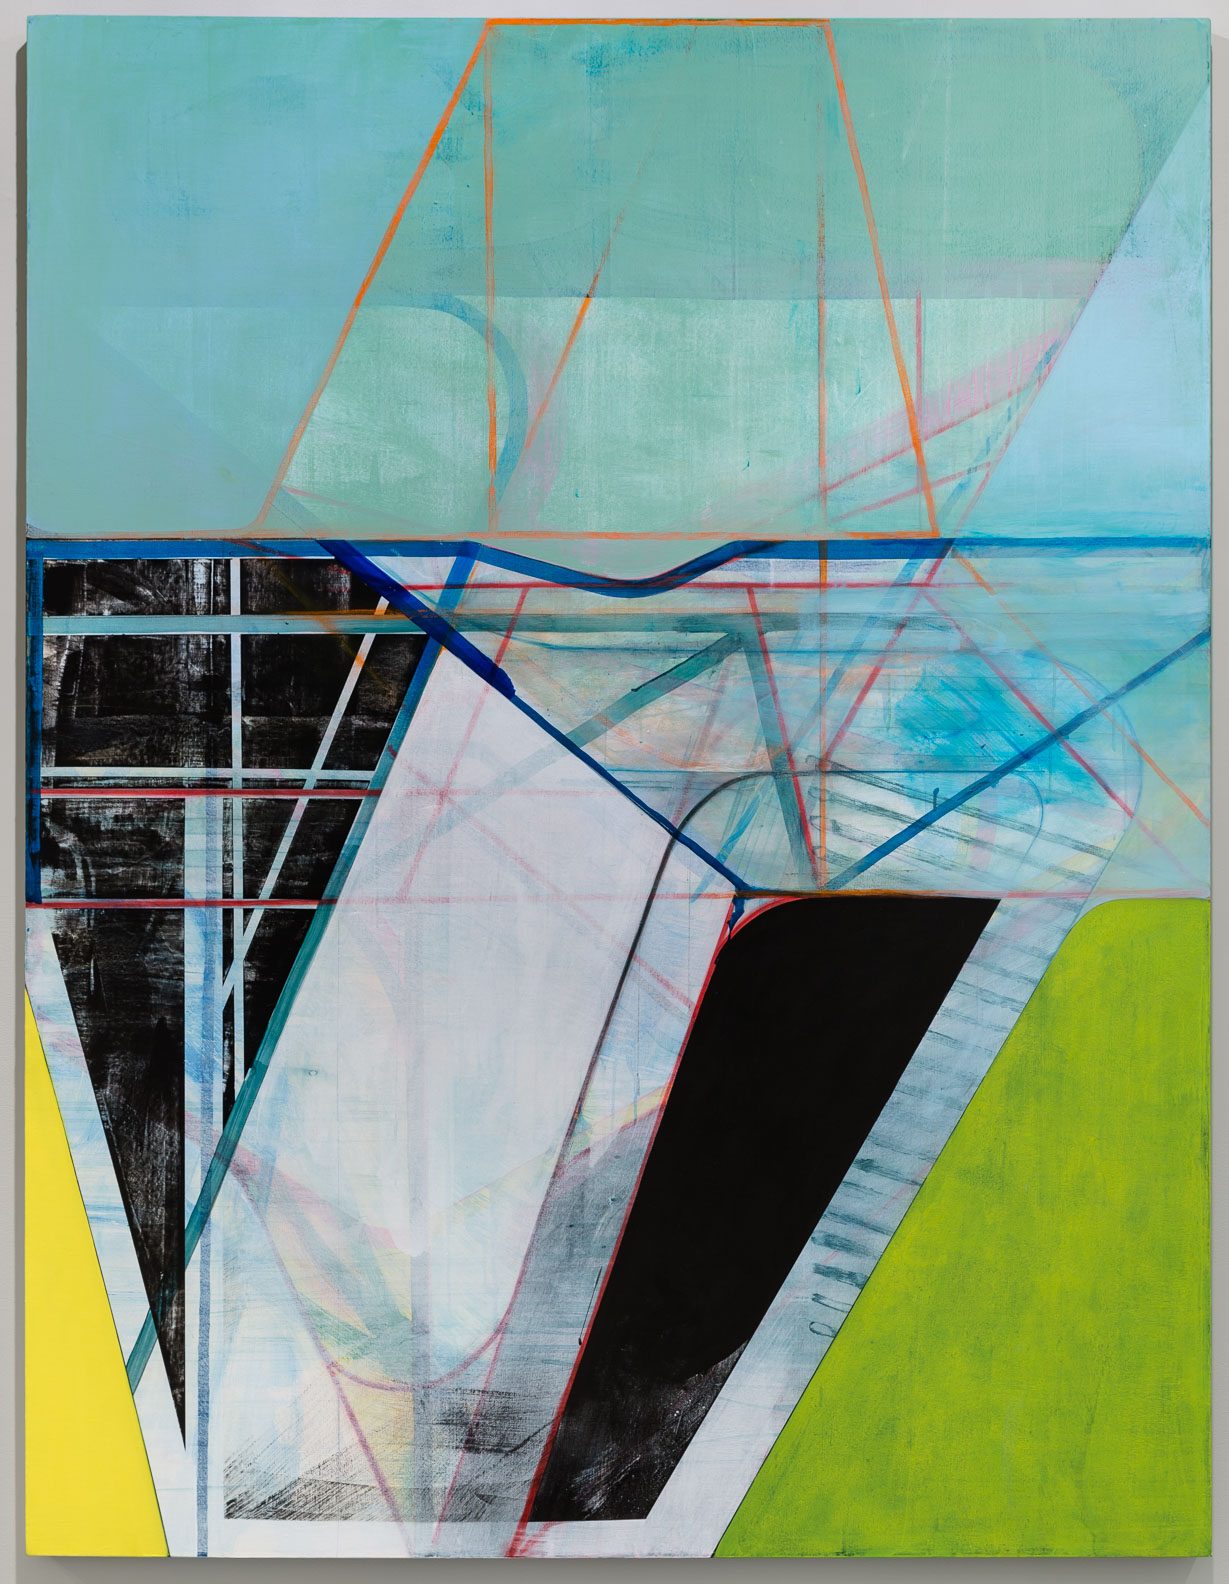   Nick Lamia  (b. 1971)  Field Station , 2018 Oil on canvas 78 x 60 inches 198.1 x 152.4 cm 